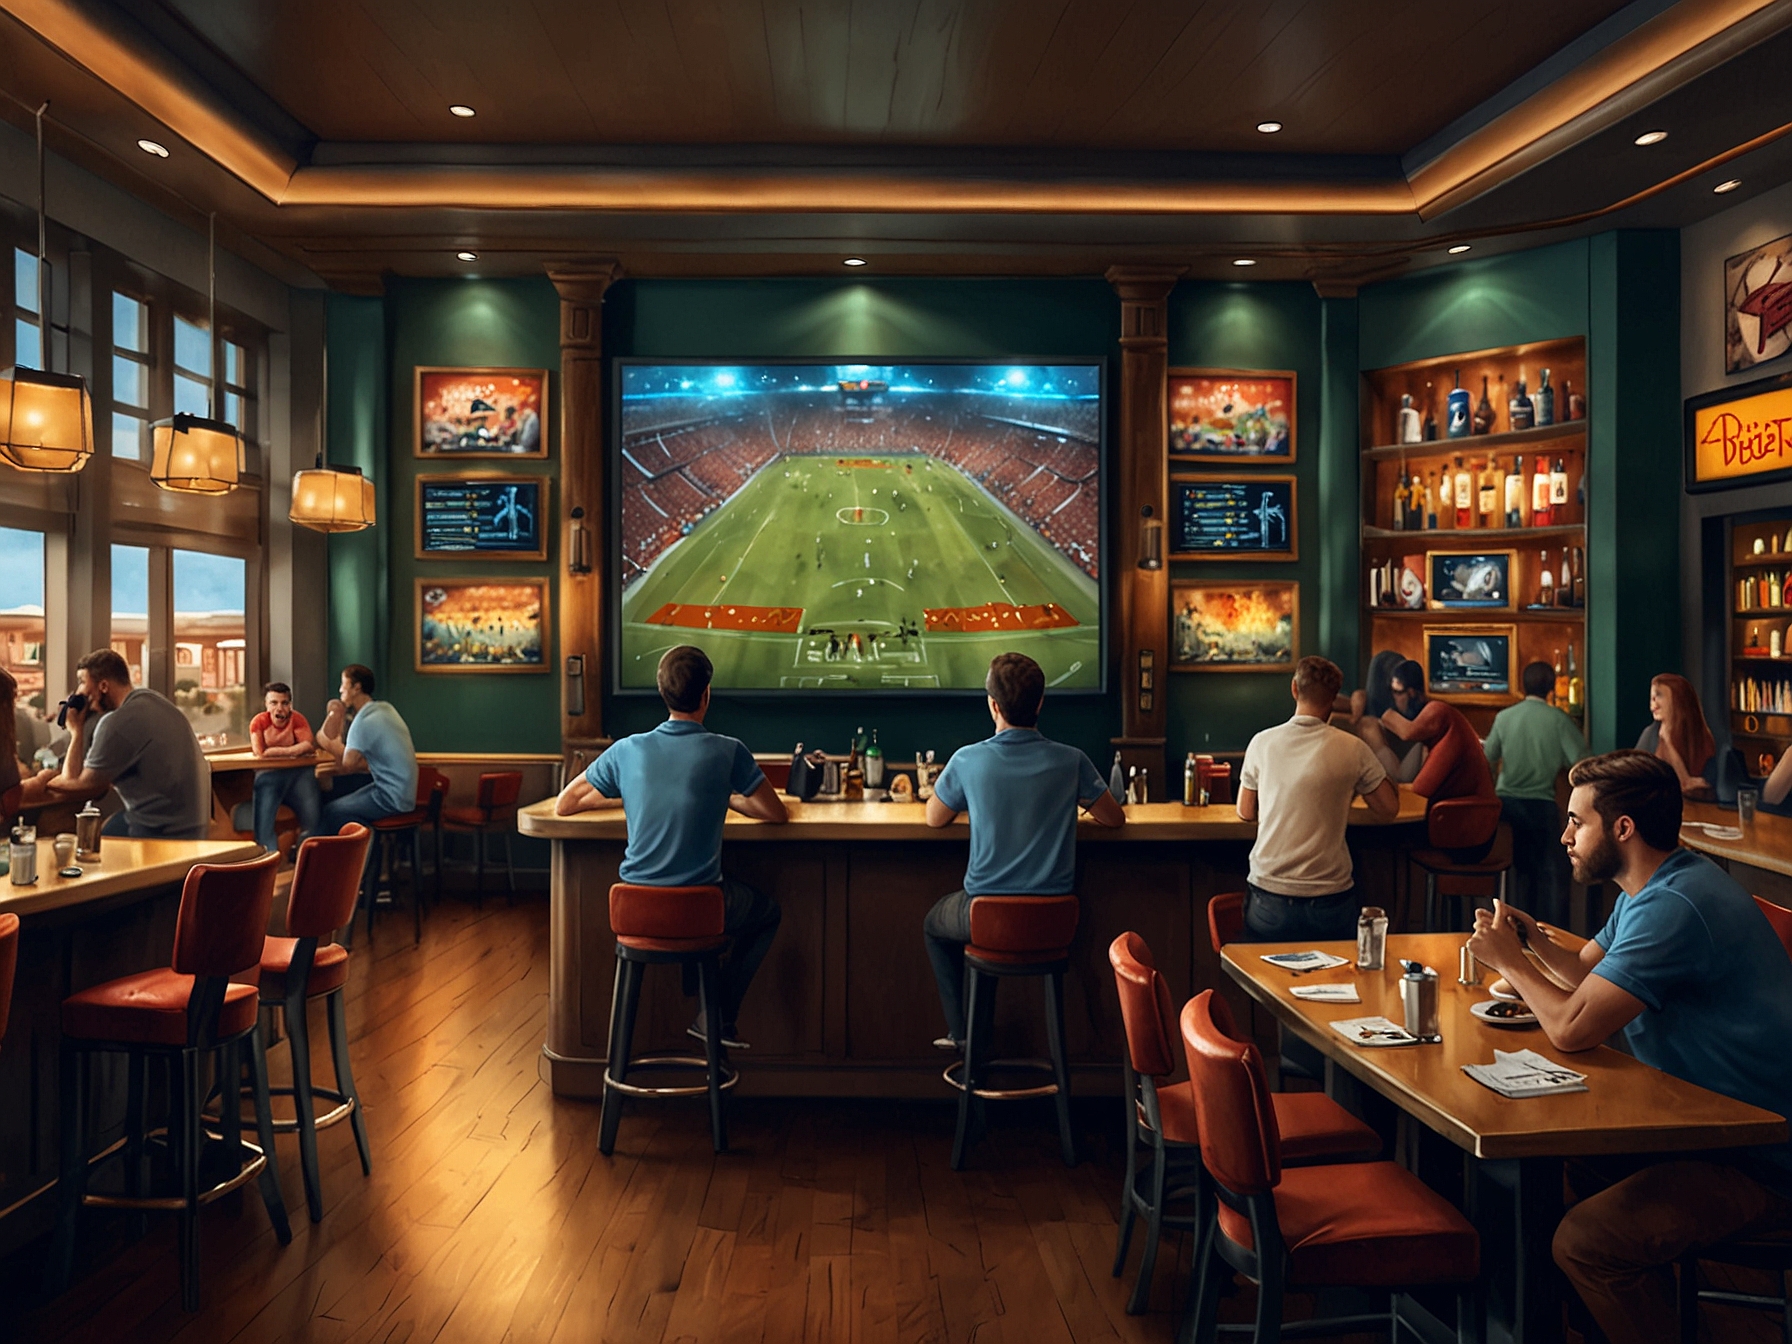 A vibrant sports bar in Las Vegas, filled with fans eagerly watching multiple screens showing different sports games, such as football, basketball, and soccer, creating an energetic atmosphere.